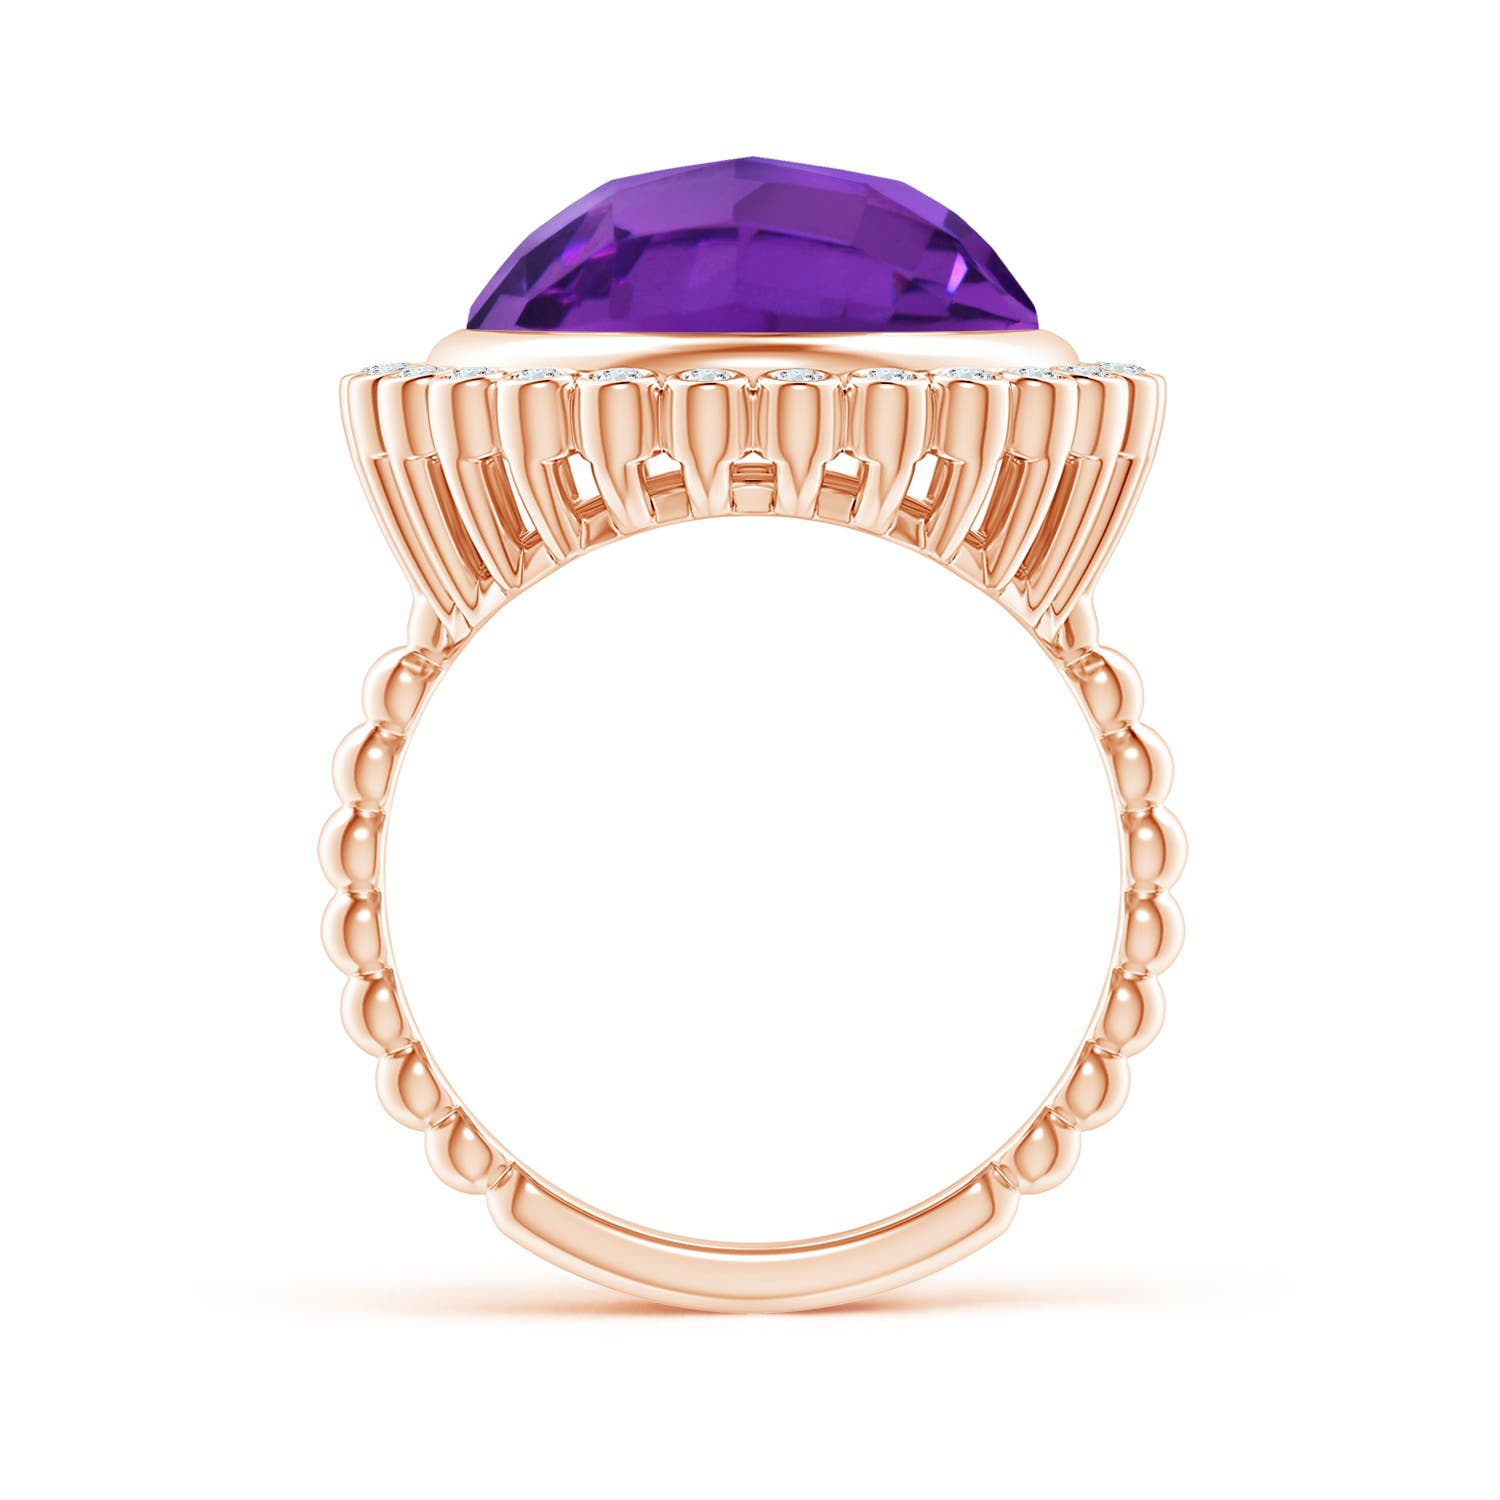 AAA - Amethyst / 8.16 CT / 14 KT Rose Gold